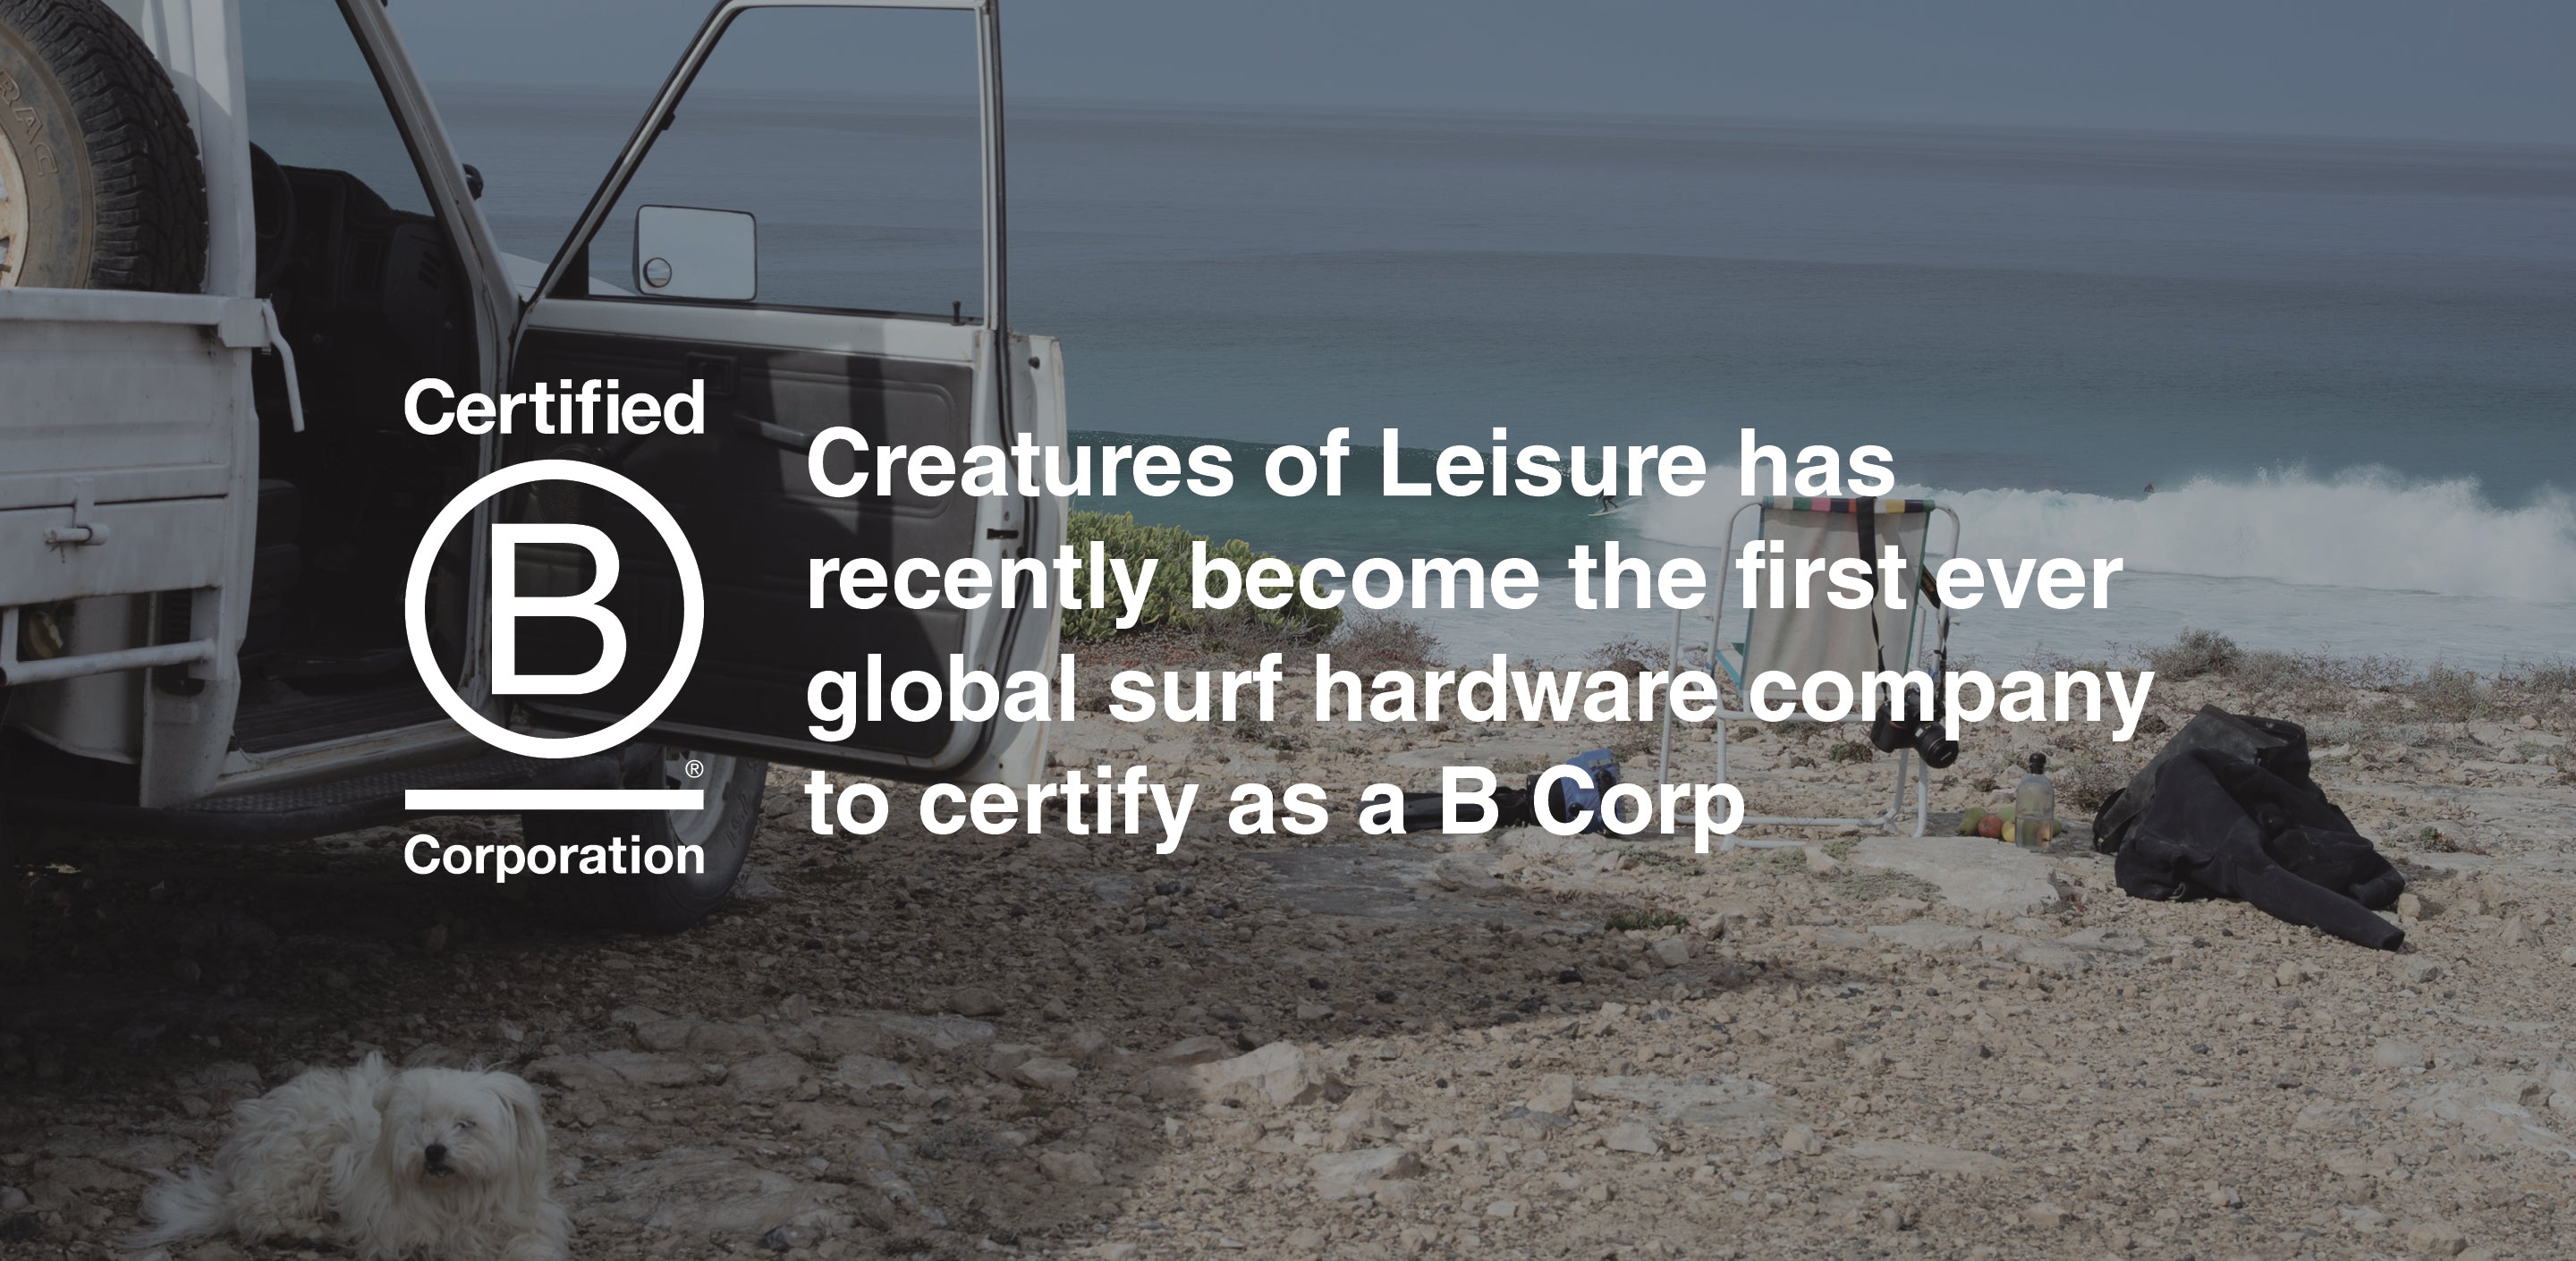 Creatures has become the first ever surf accessories to certify as B Corp